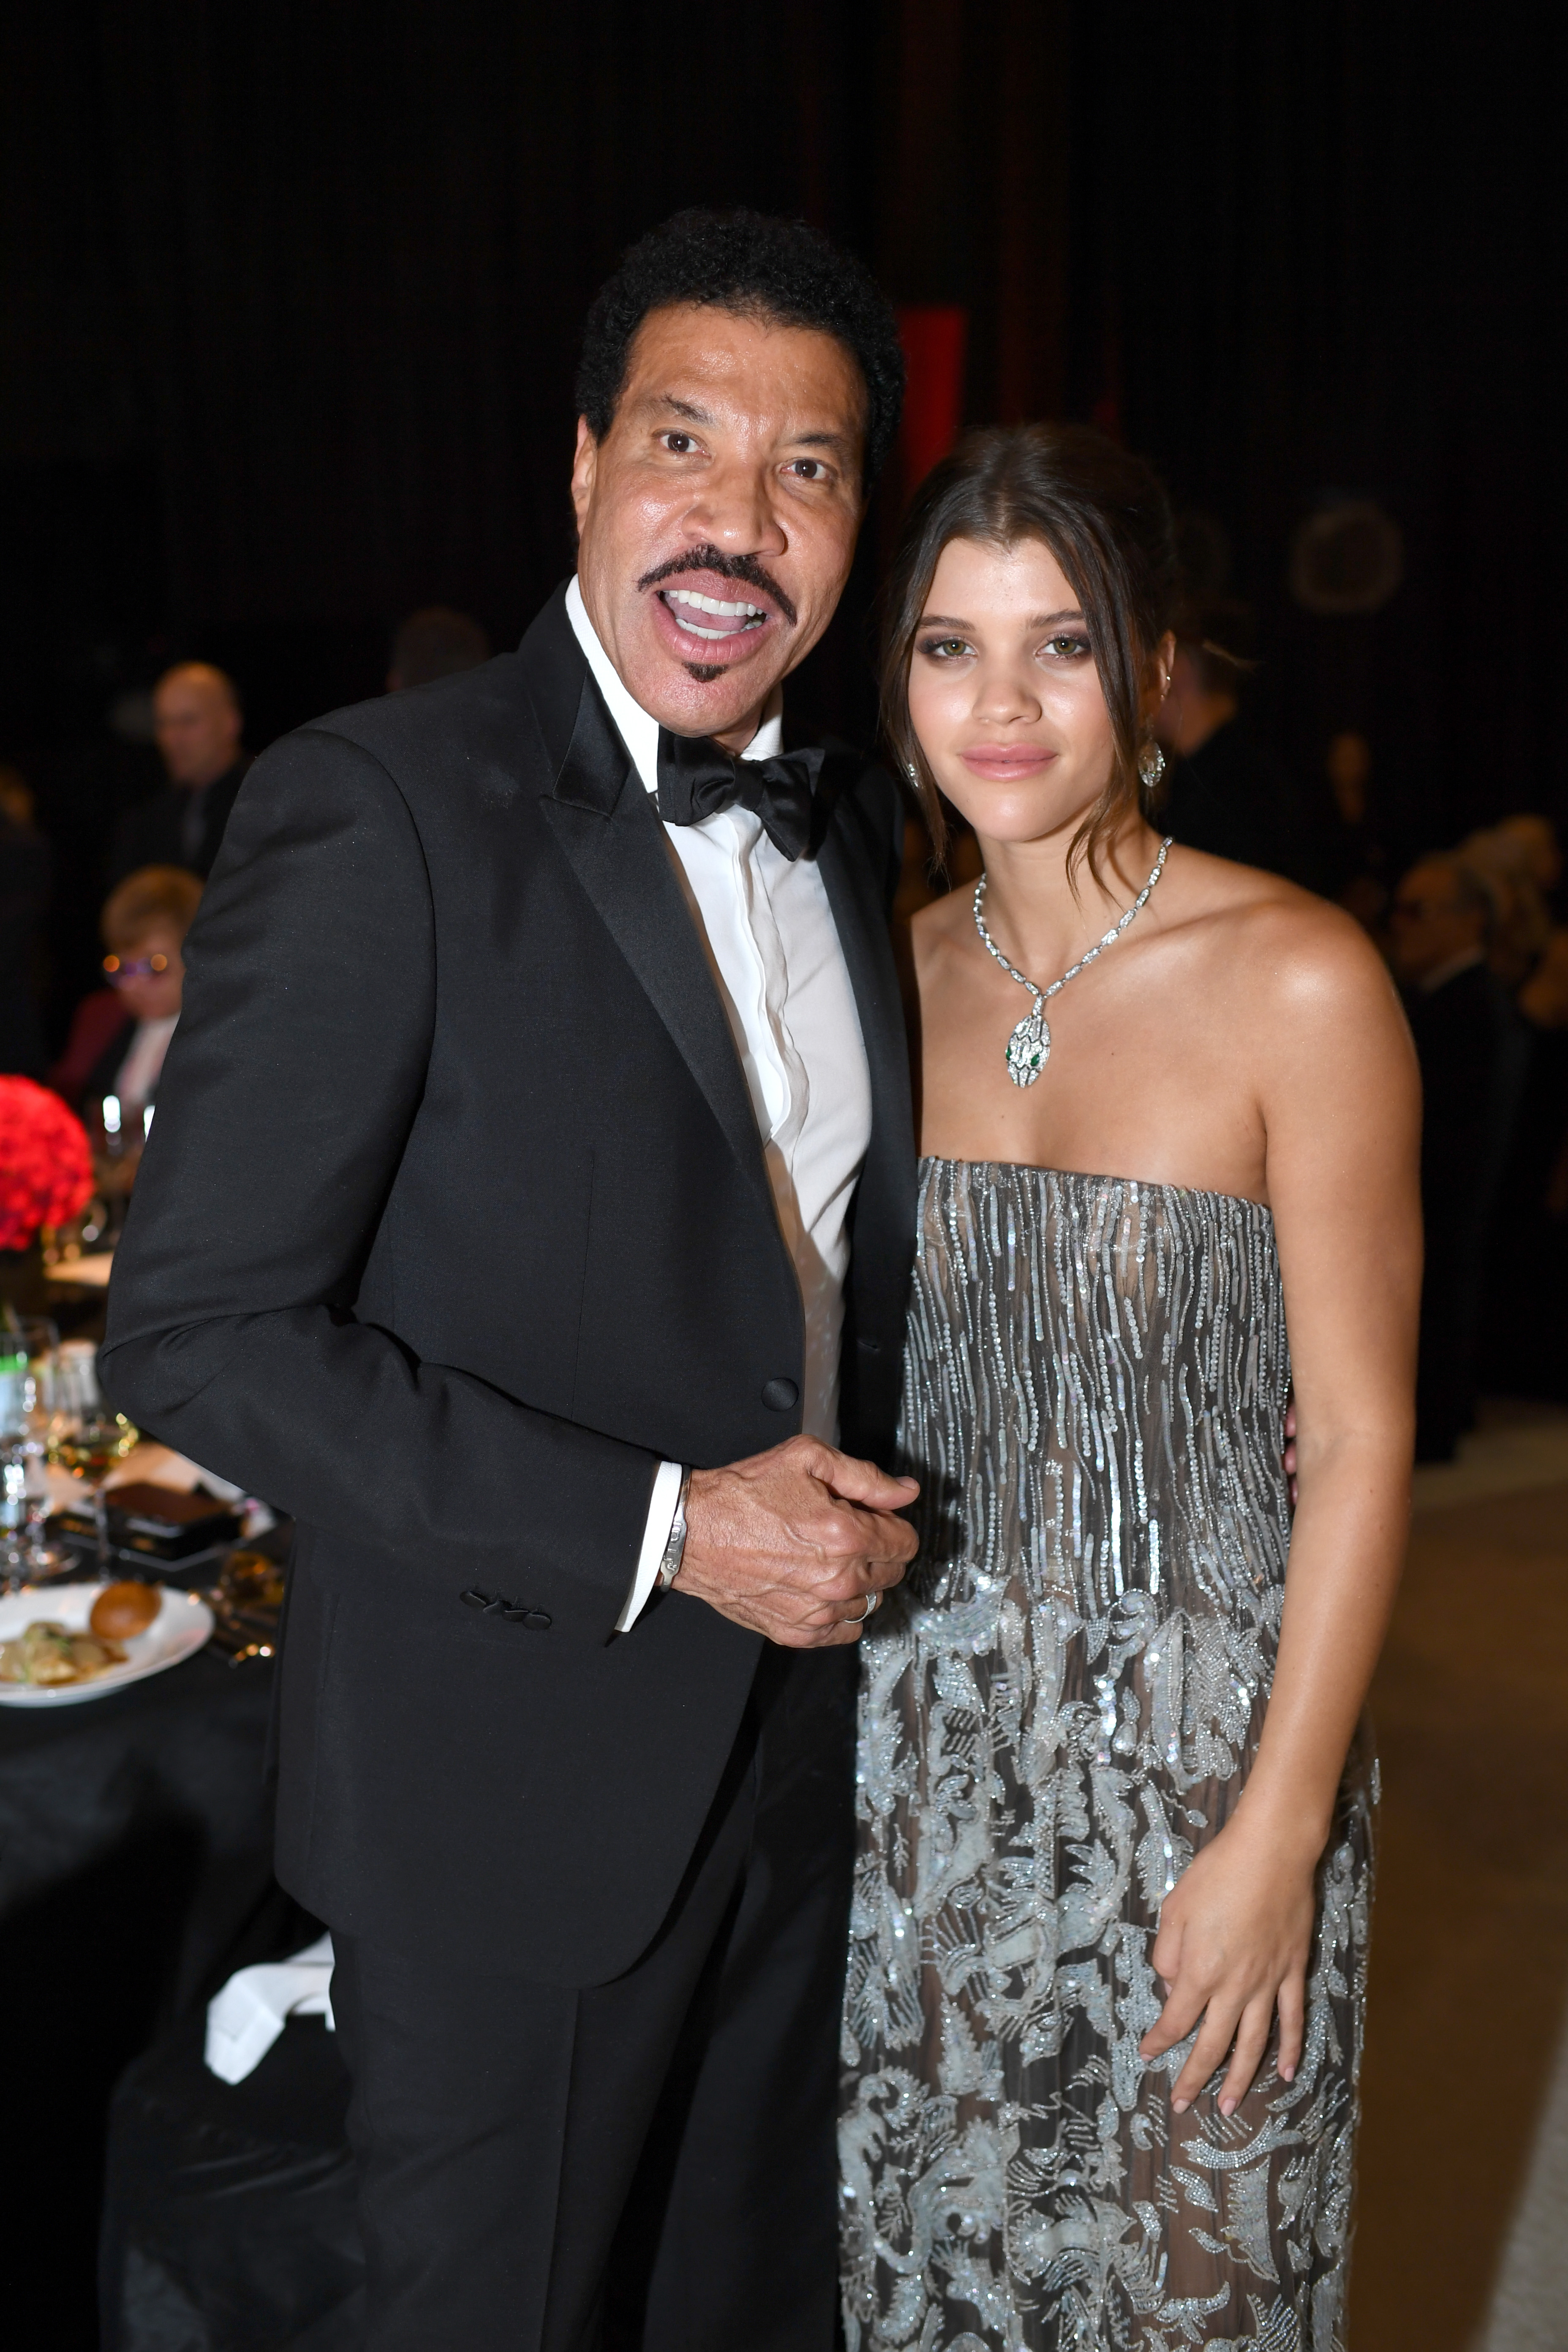 Lionel and Sofia Richie attend the 26th annual Elton John AIDS Foundation Academy Awards Viewing Party in West Hollywood, California, on March 4, 2018. | Source: Getty Images